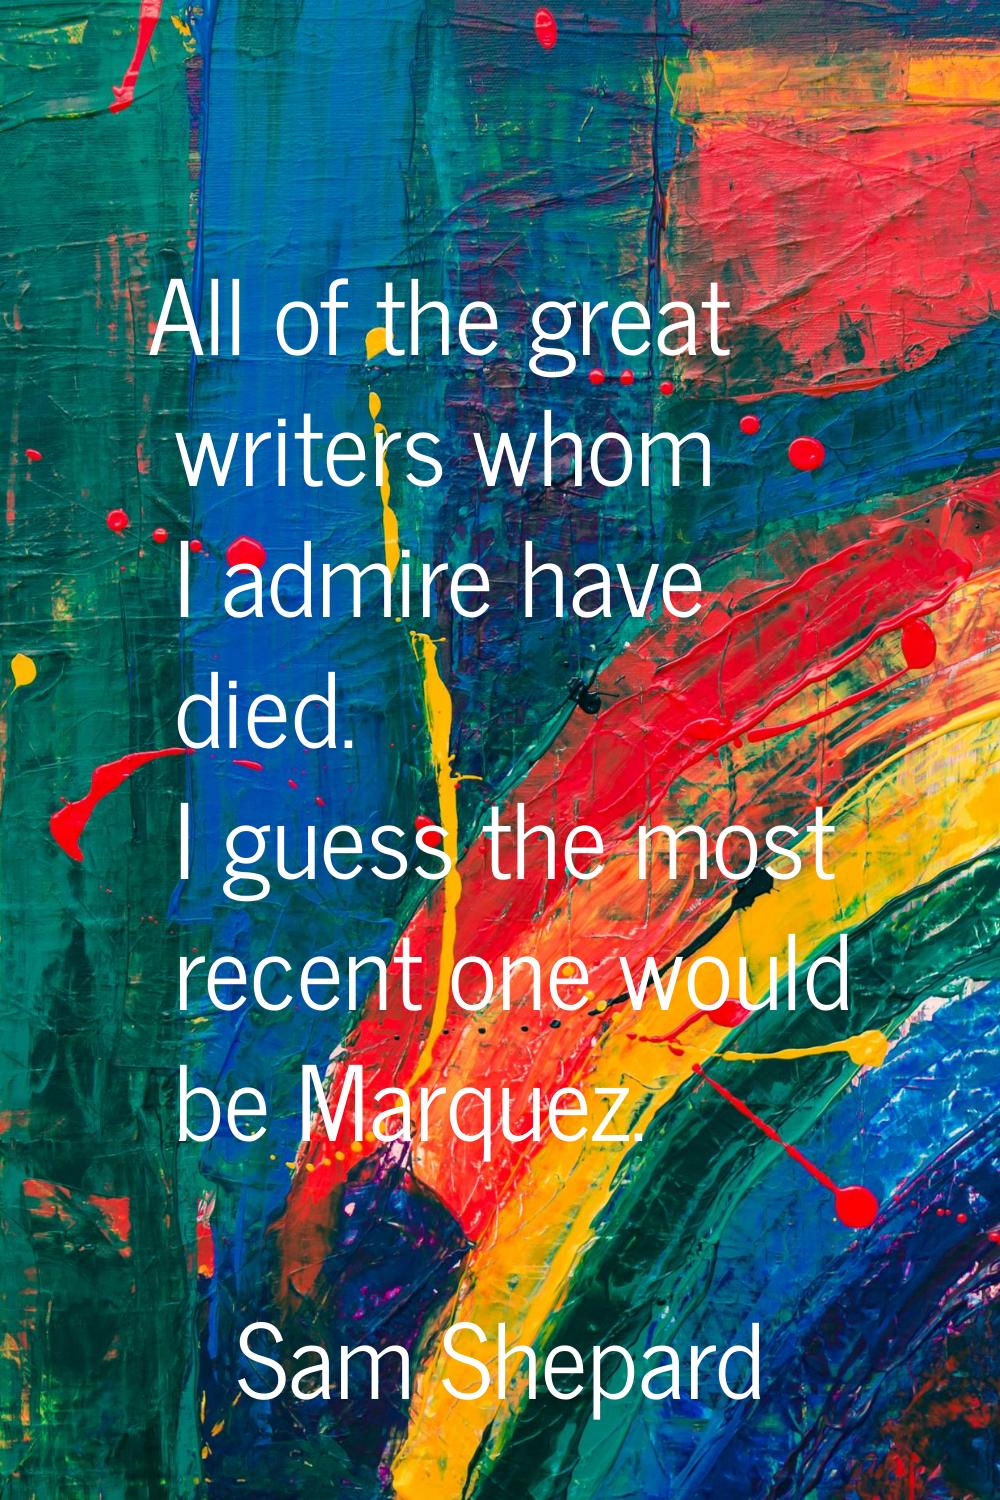 All of the great writers whom I admire have died. I guess the most recent one would be Marquez.